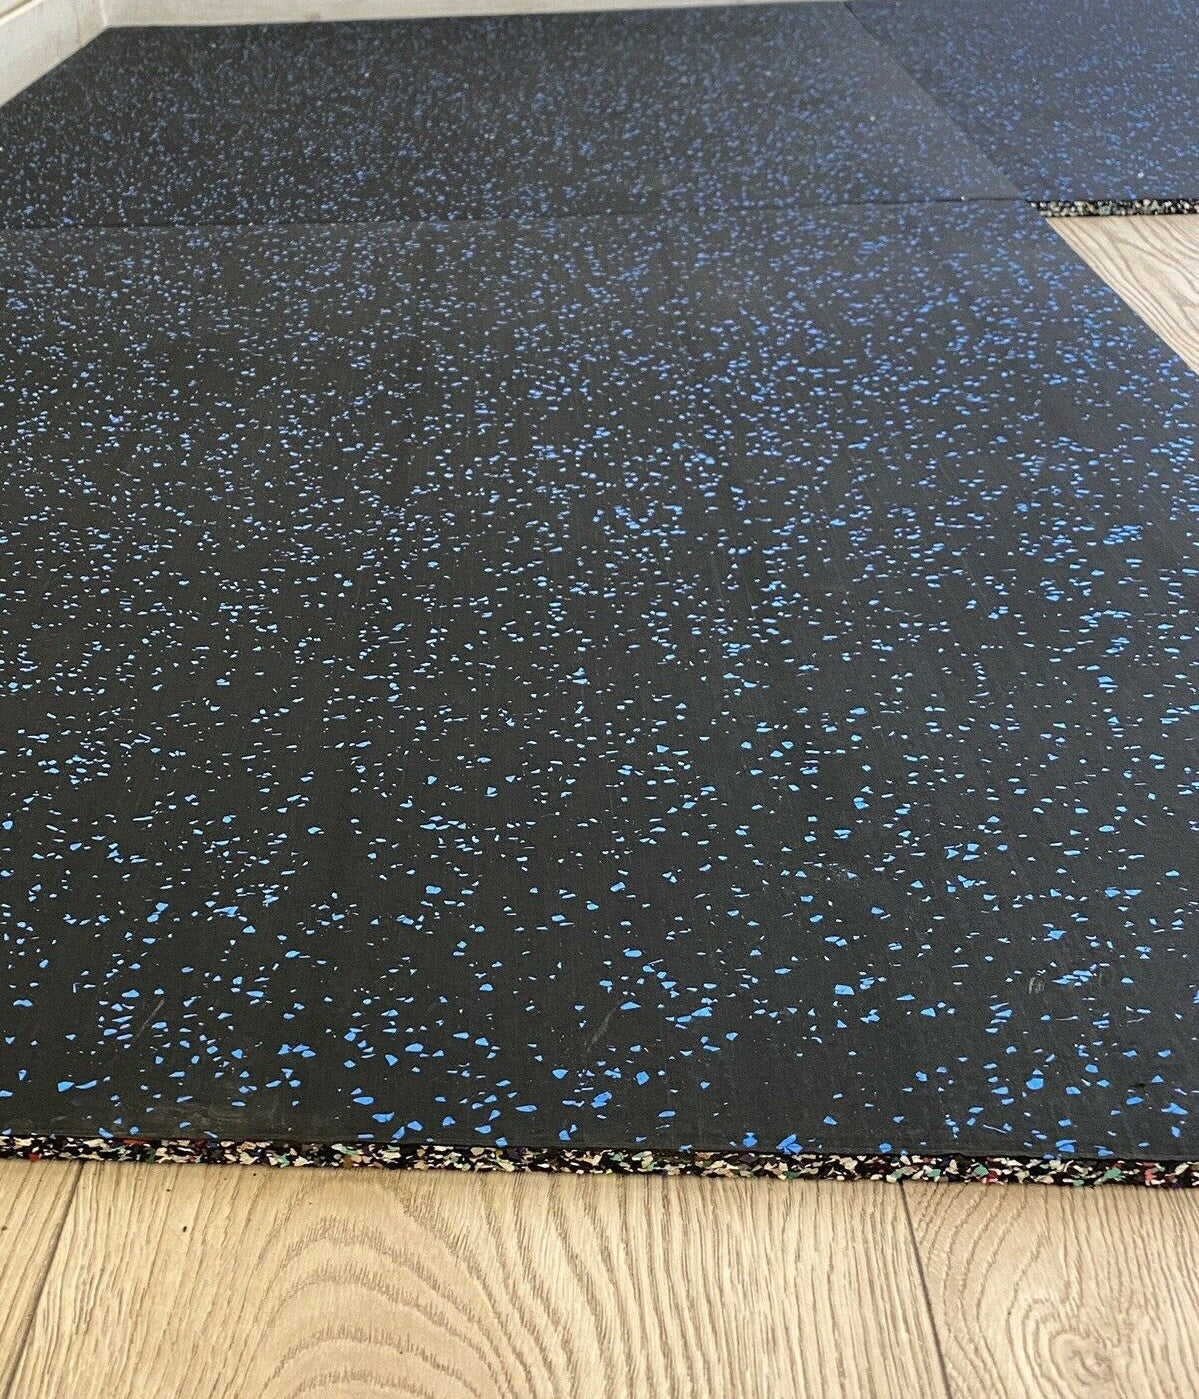 1441 Fitness Heavy Duty Gym Tile 15 mm Speckled Blue - 100 x 100 CM | Rubber Flooring